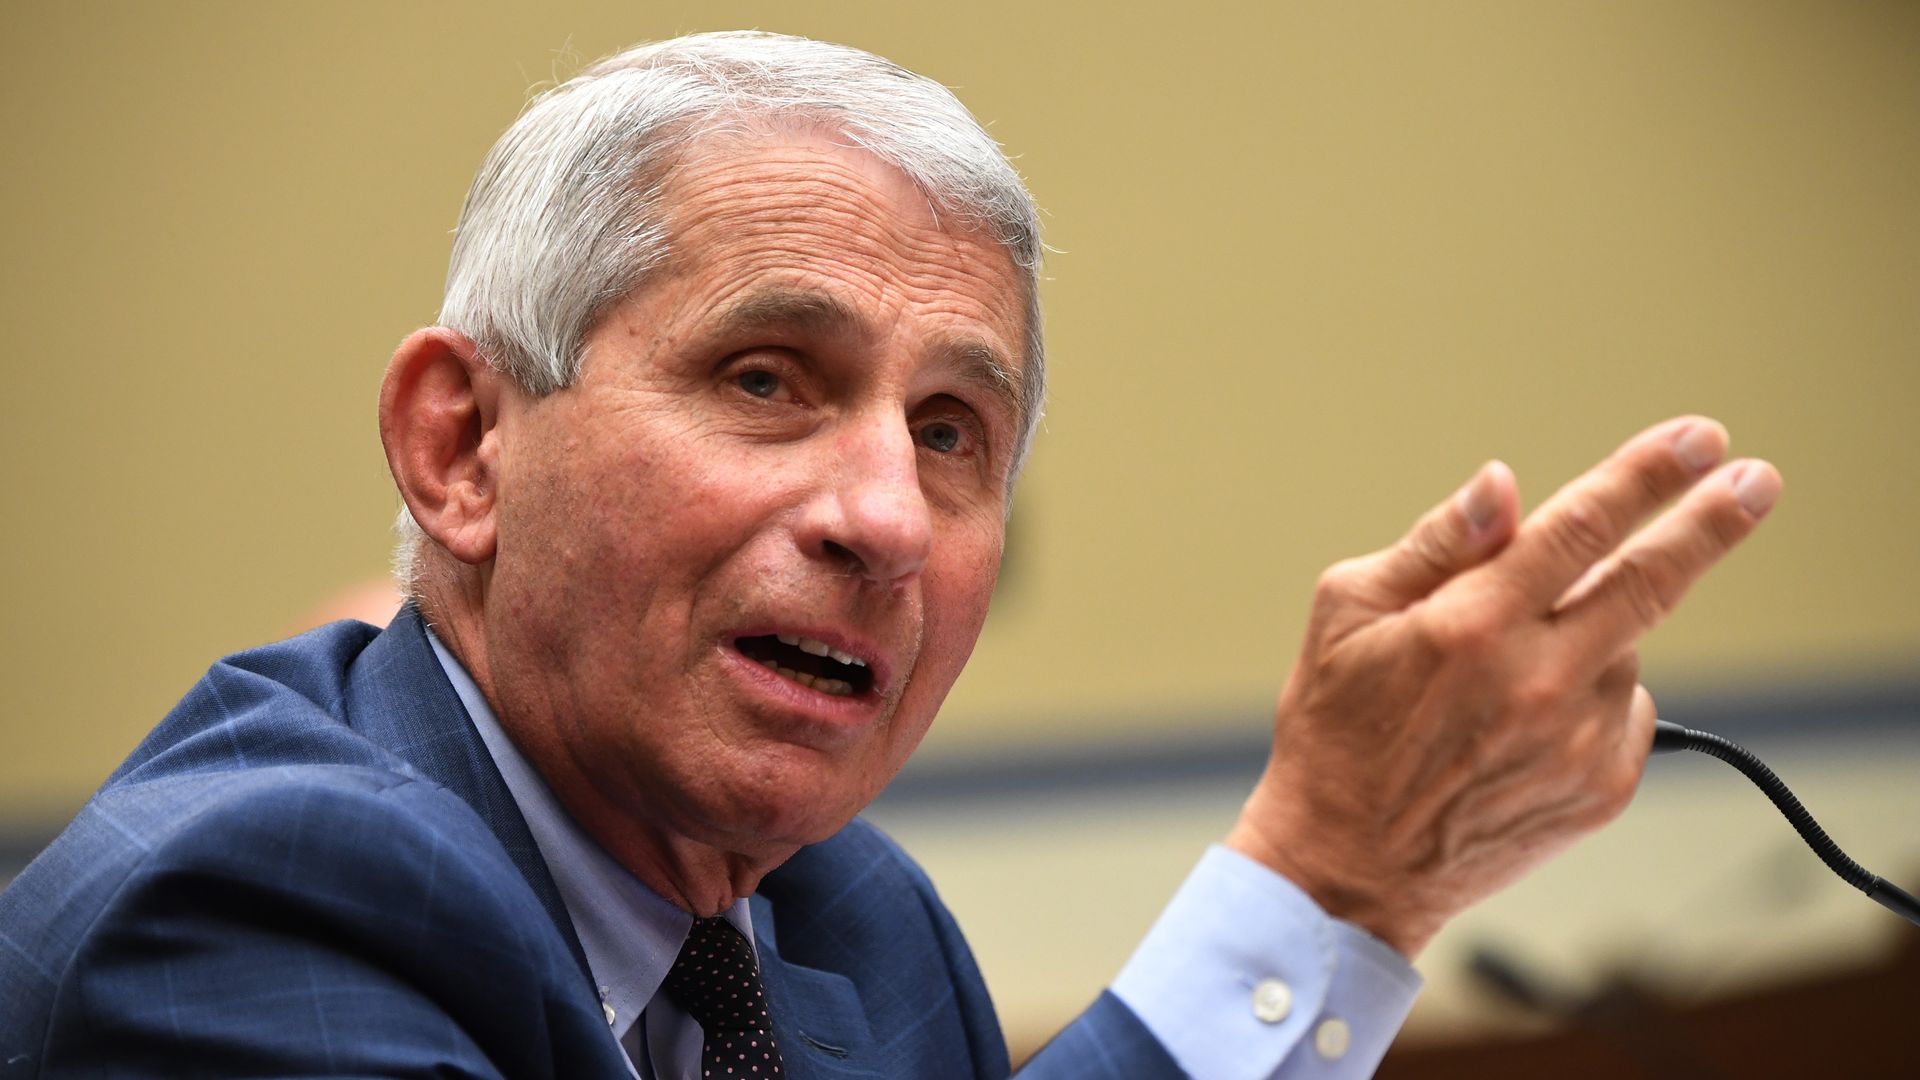 Anthony Fauci testifying before the House Subcommittee on the Coronavirus Crisis in July.